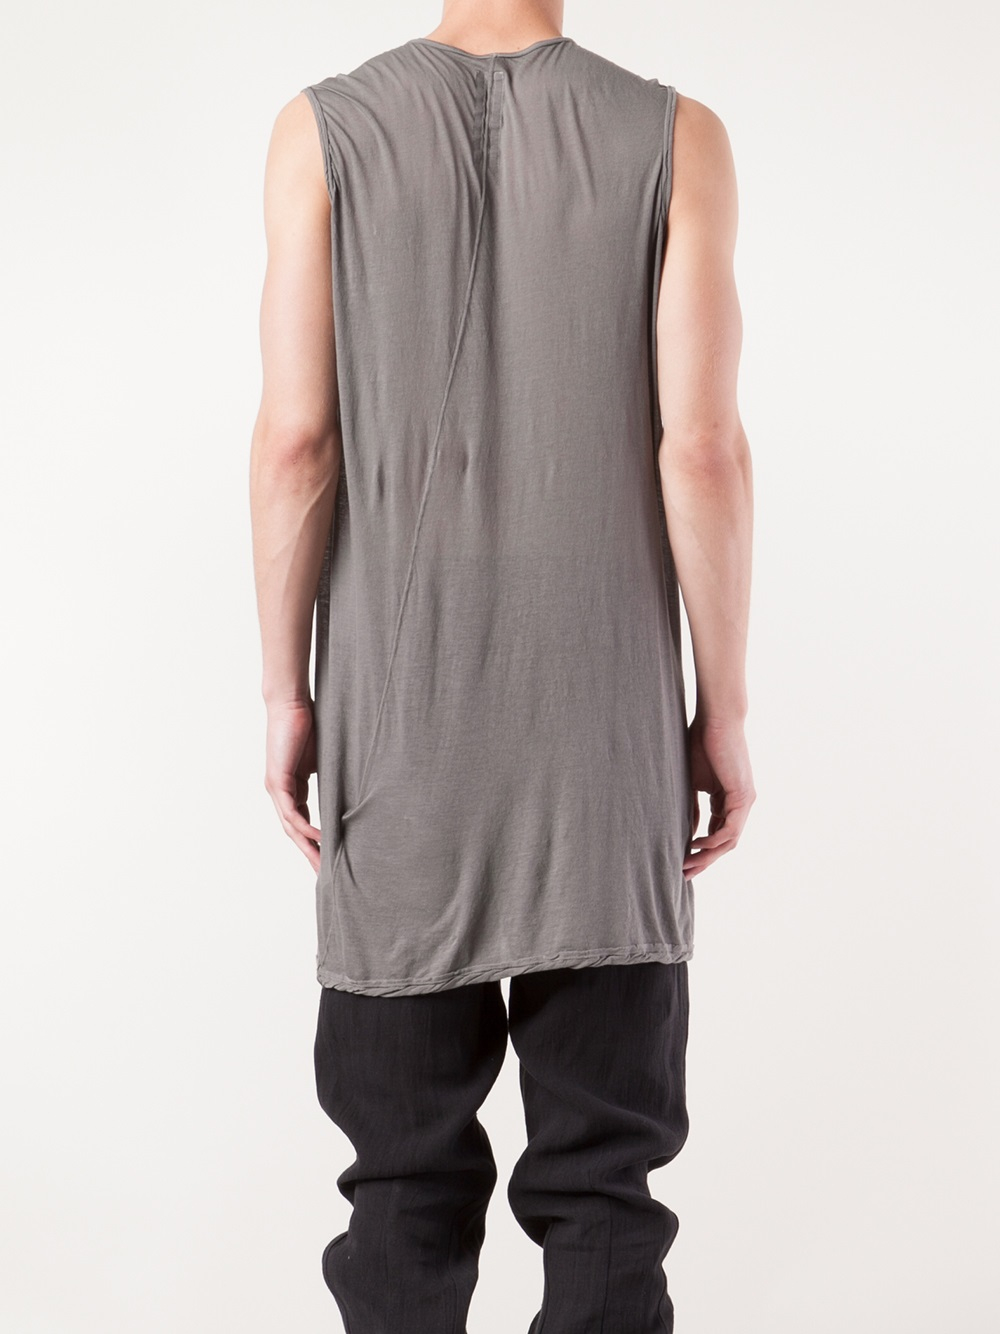 lyst-drkshdw-by-rick-owens-sleeveless-tunic-top-in-gray-for-men